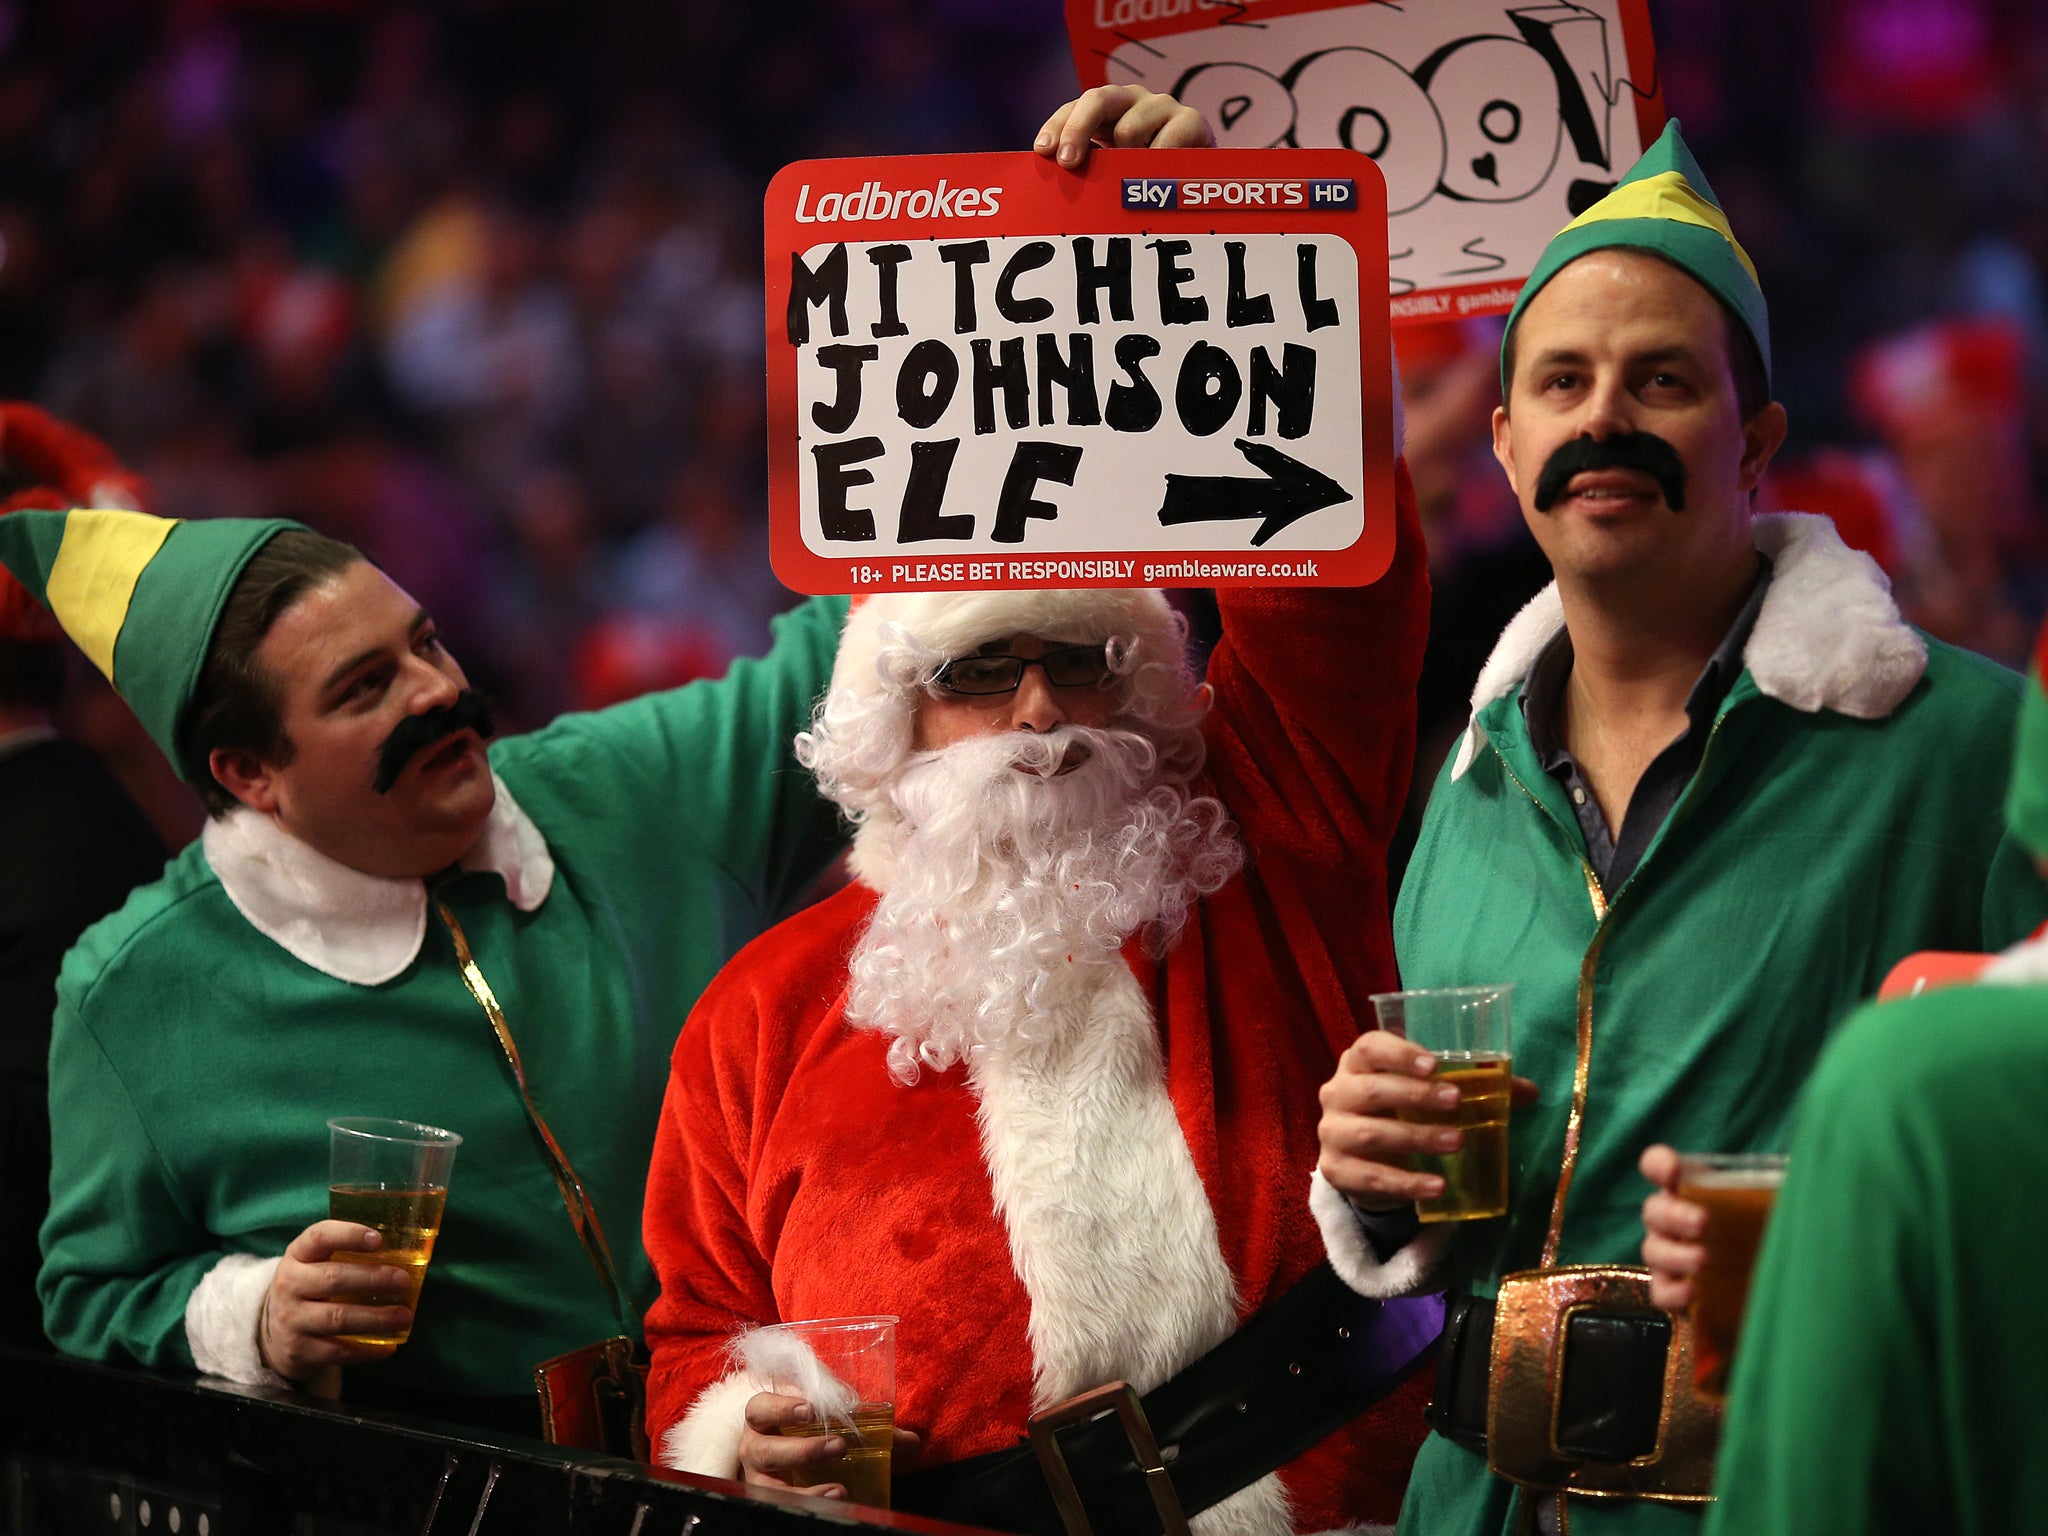 Fans at the World Darts Championship keep themselves entertained with the various fancy dress seen each night